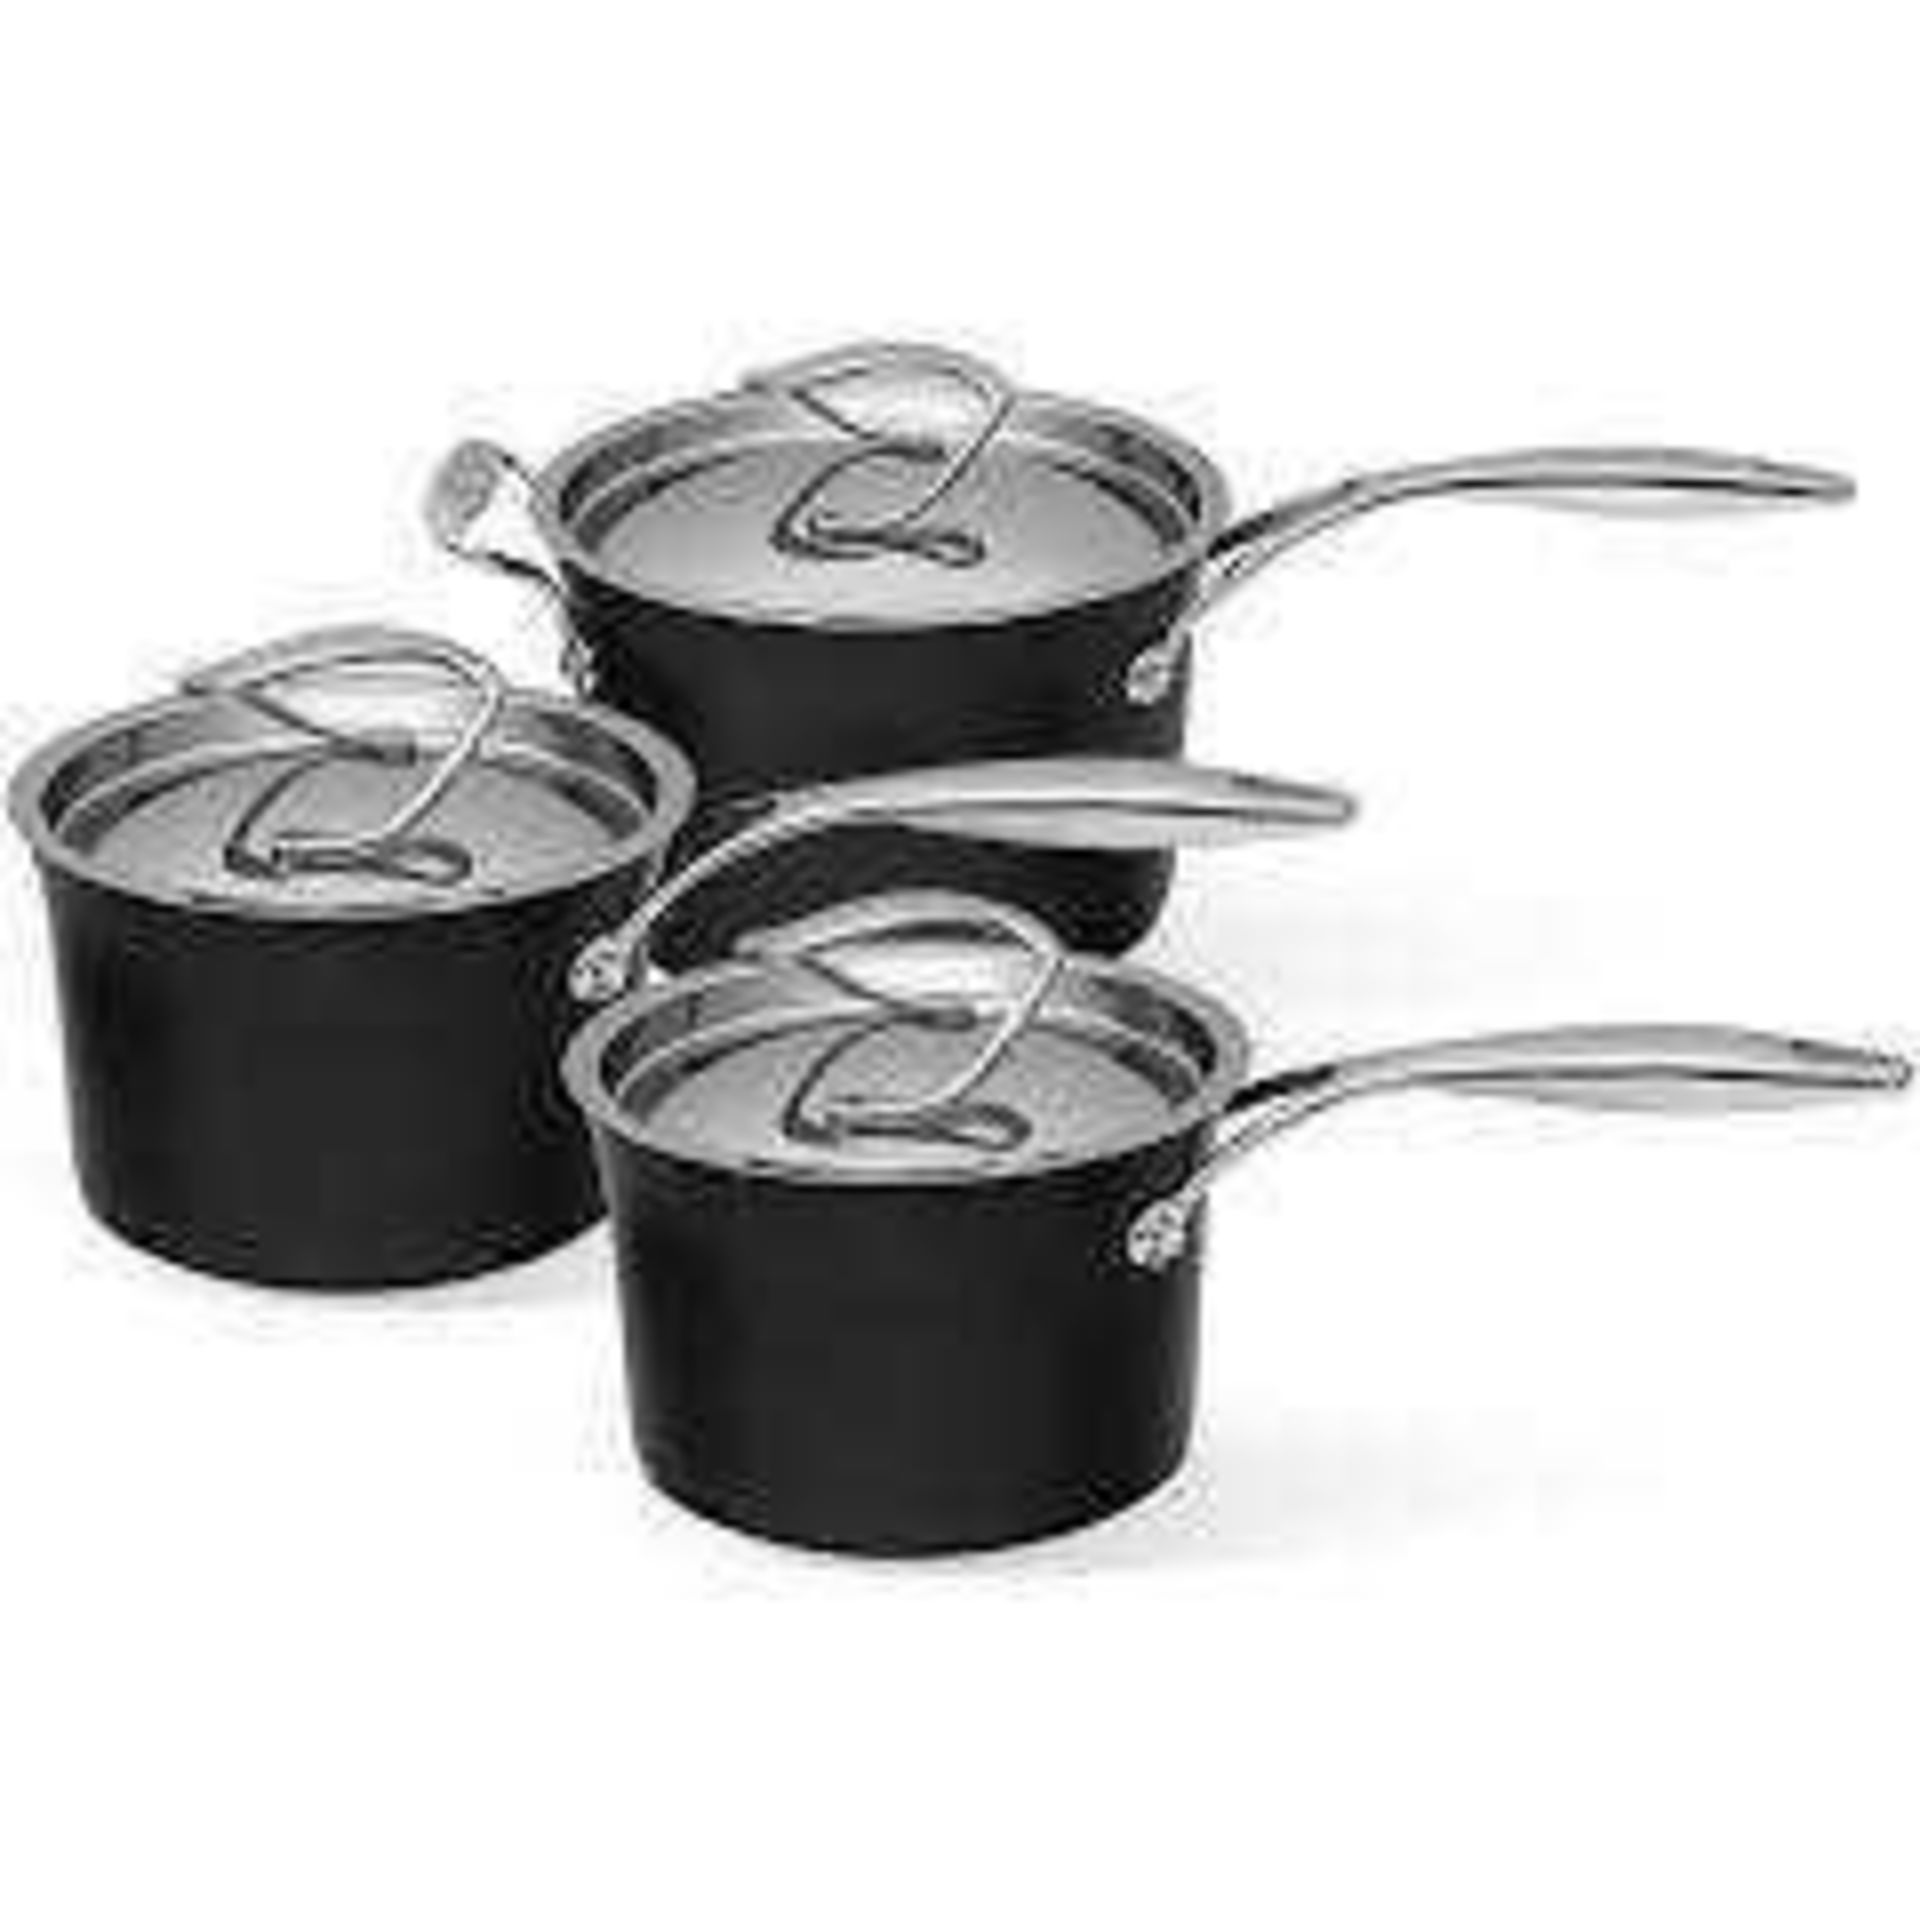 (Jb) RRP £185 Lot To Contain 1 Unpackaged Circulon Style 3 Piece Hard Anodized Saucepan Set (No Tag)